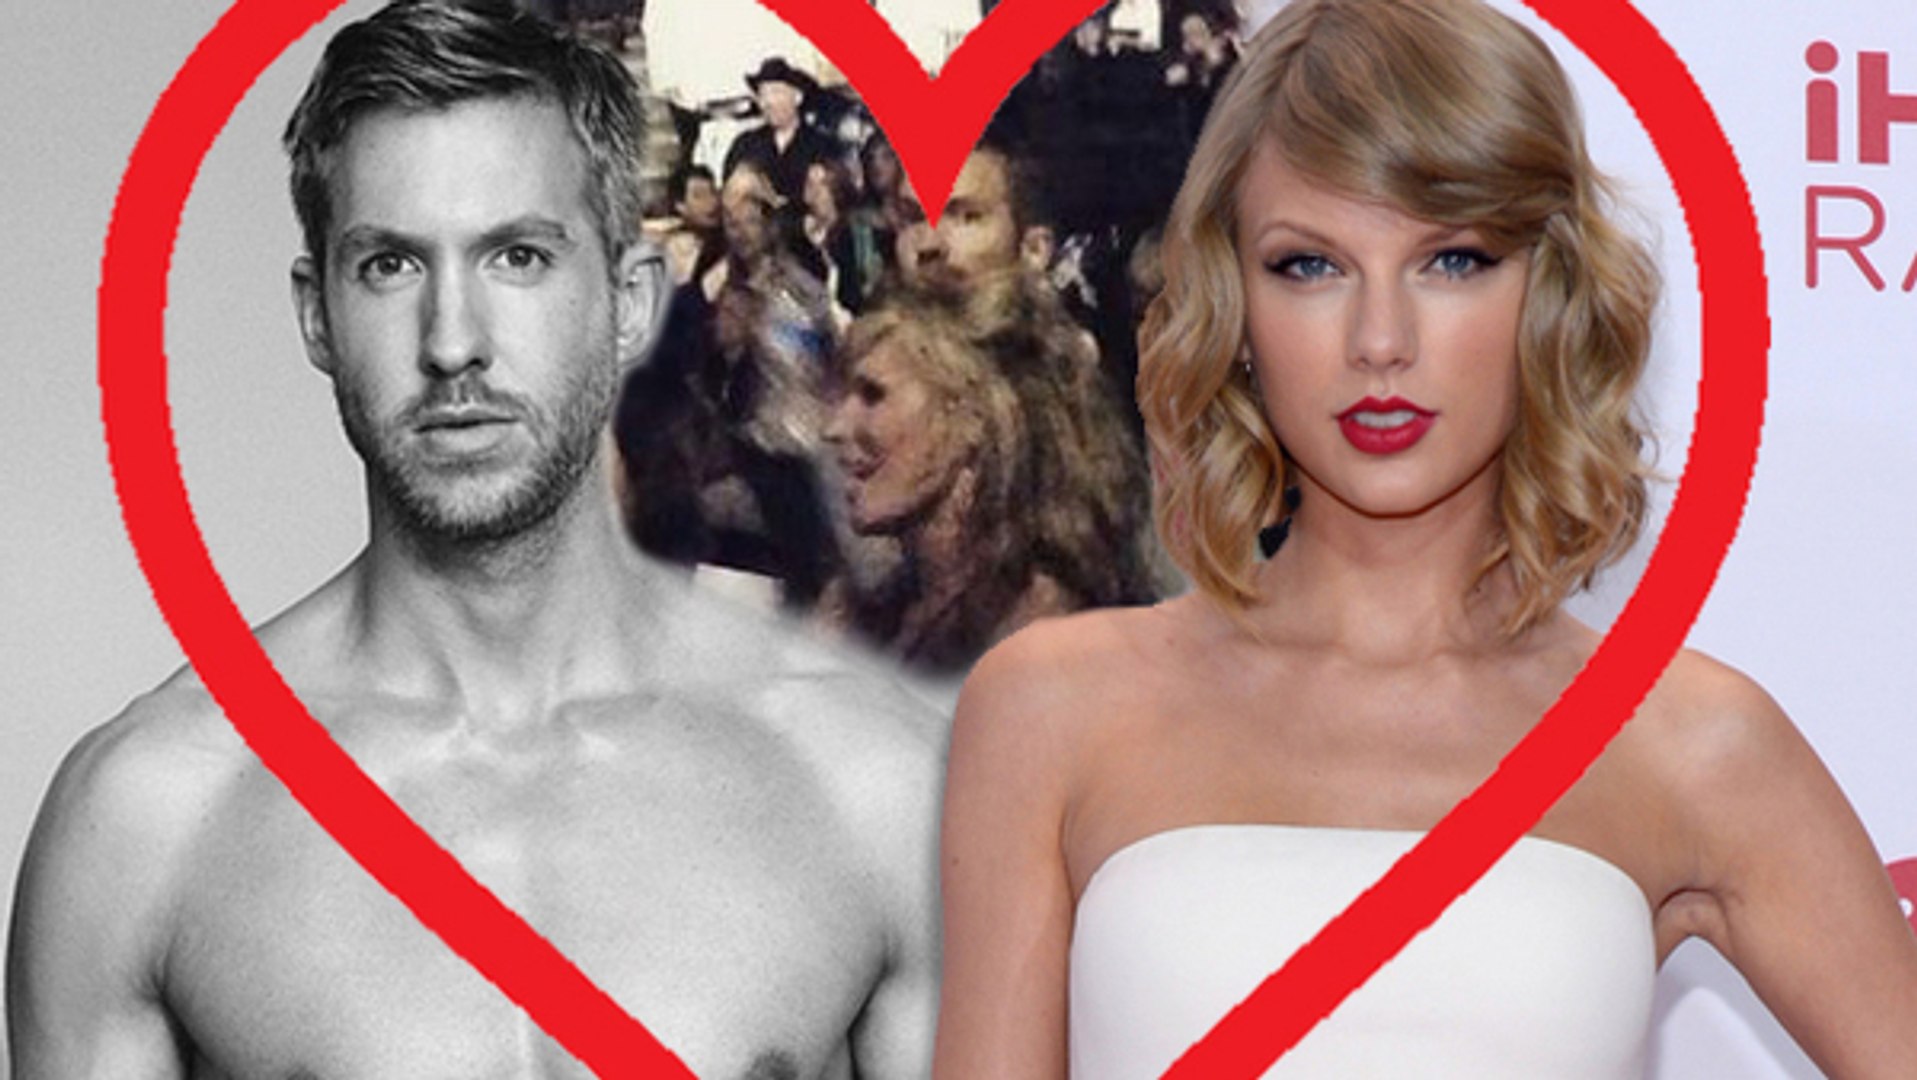 Taylor Swift & Calvin Harris are Hooking Up! [EXCLUSIVE VIDEO PROOF]